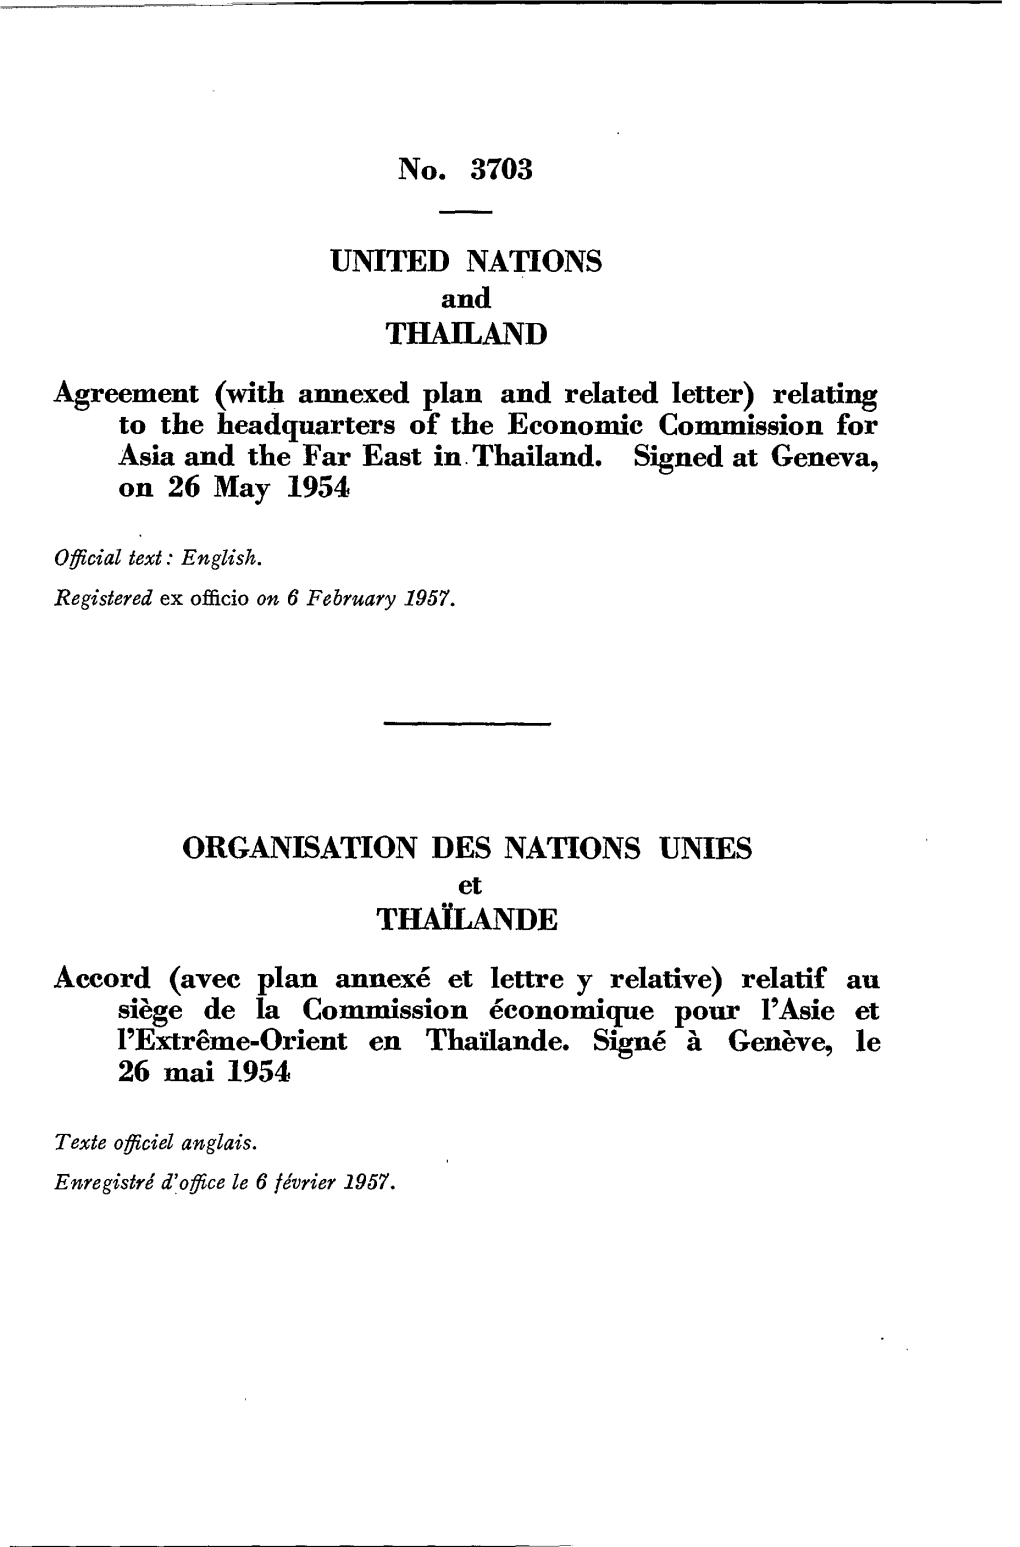 No. 3703 UNITED NATIONS and THAILAND